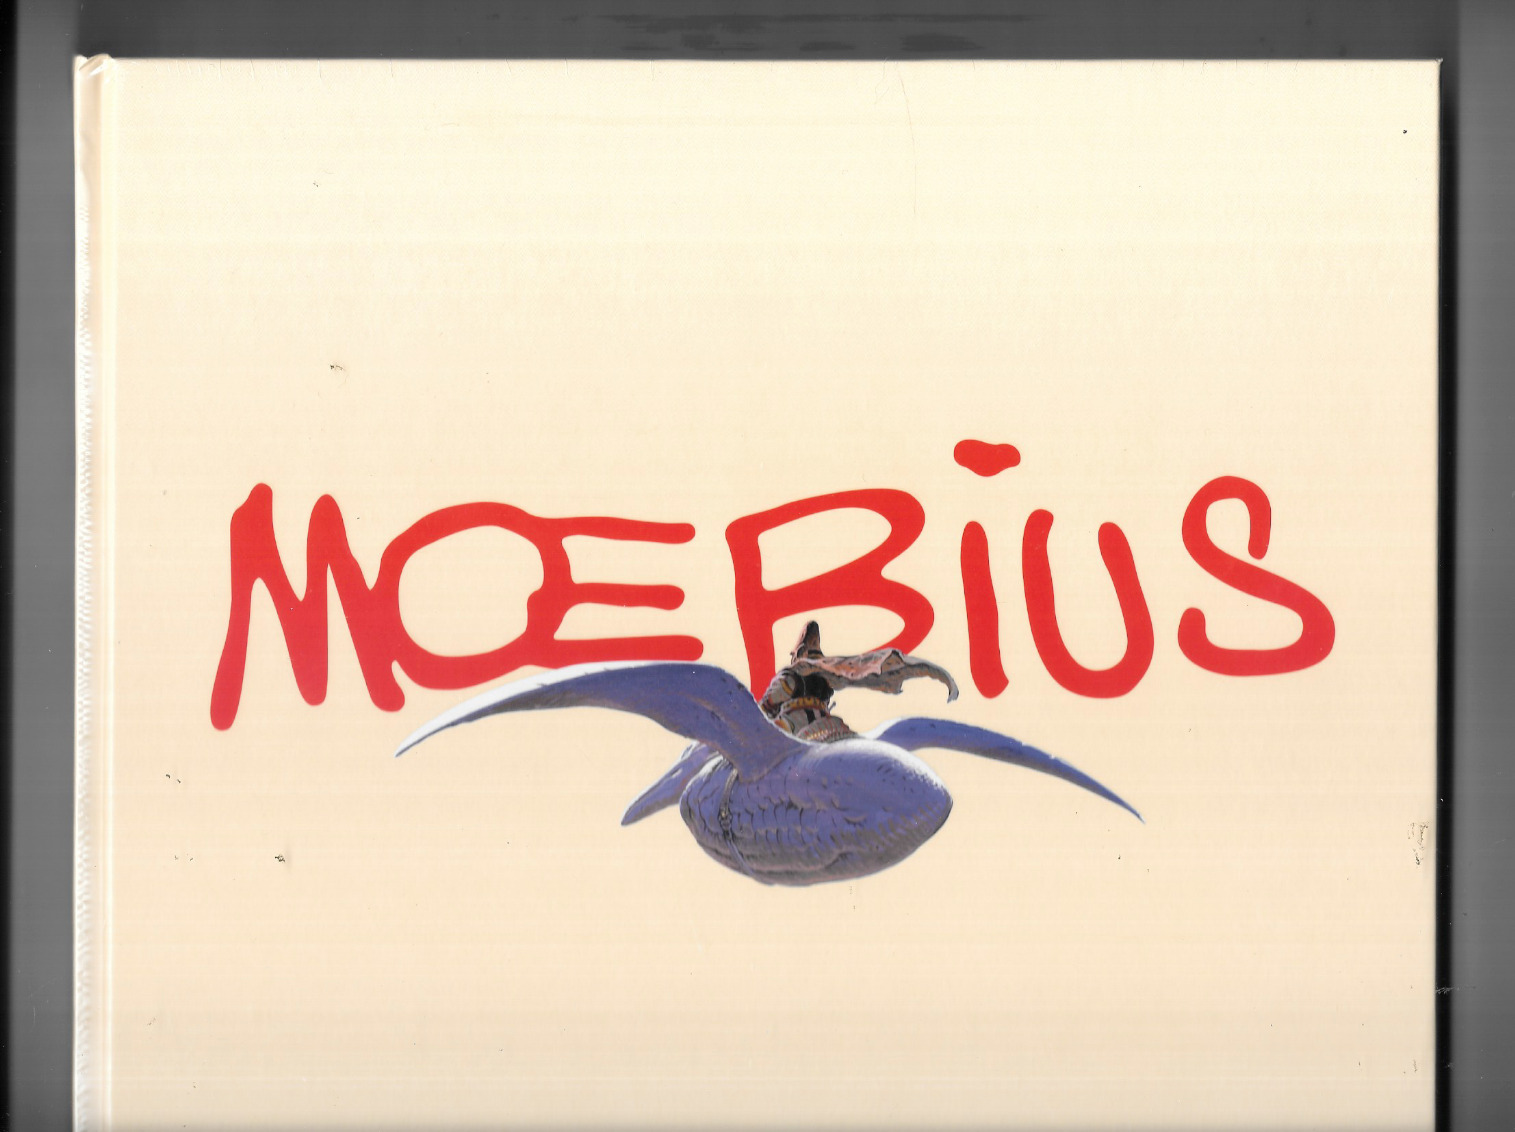 Moebius 2019 Max Ernst Museum 272pp Eng. HC Limited Edition Heavy Metal Art Mint